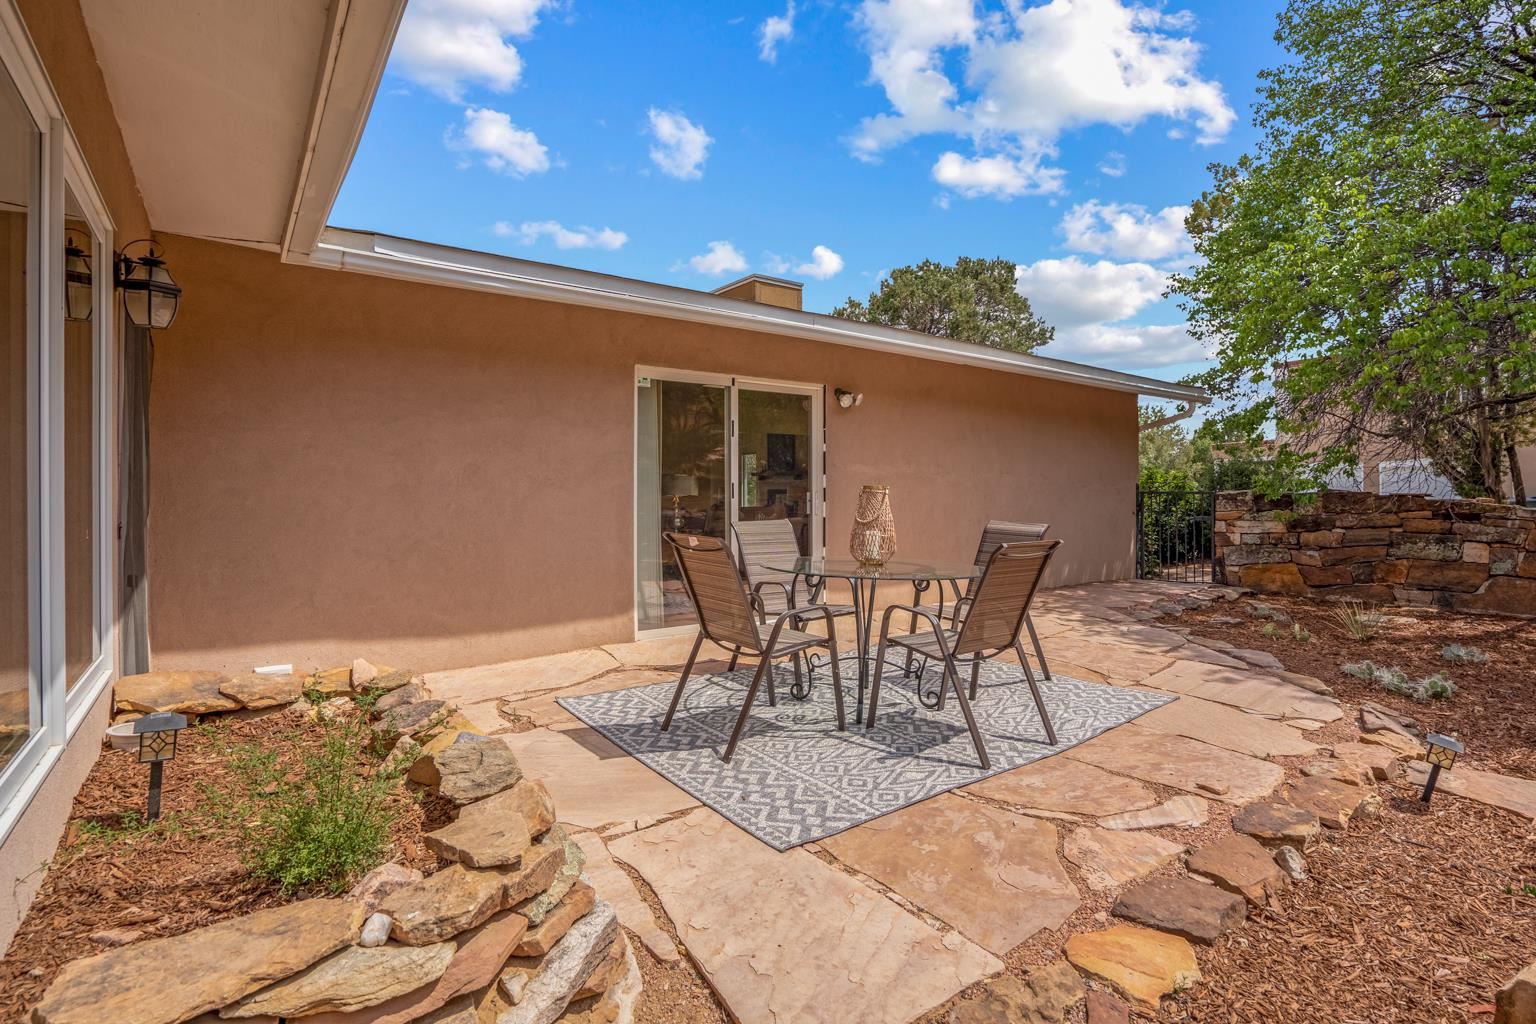 105 Michelle, Santa Fe, New Mexico 87501, 4 Bedrooms Bedrooms, ,3 BathroomsBathrooms,Residential,For Sale,105 Michelle,202102735